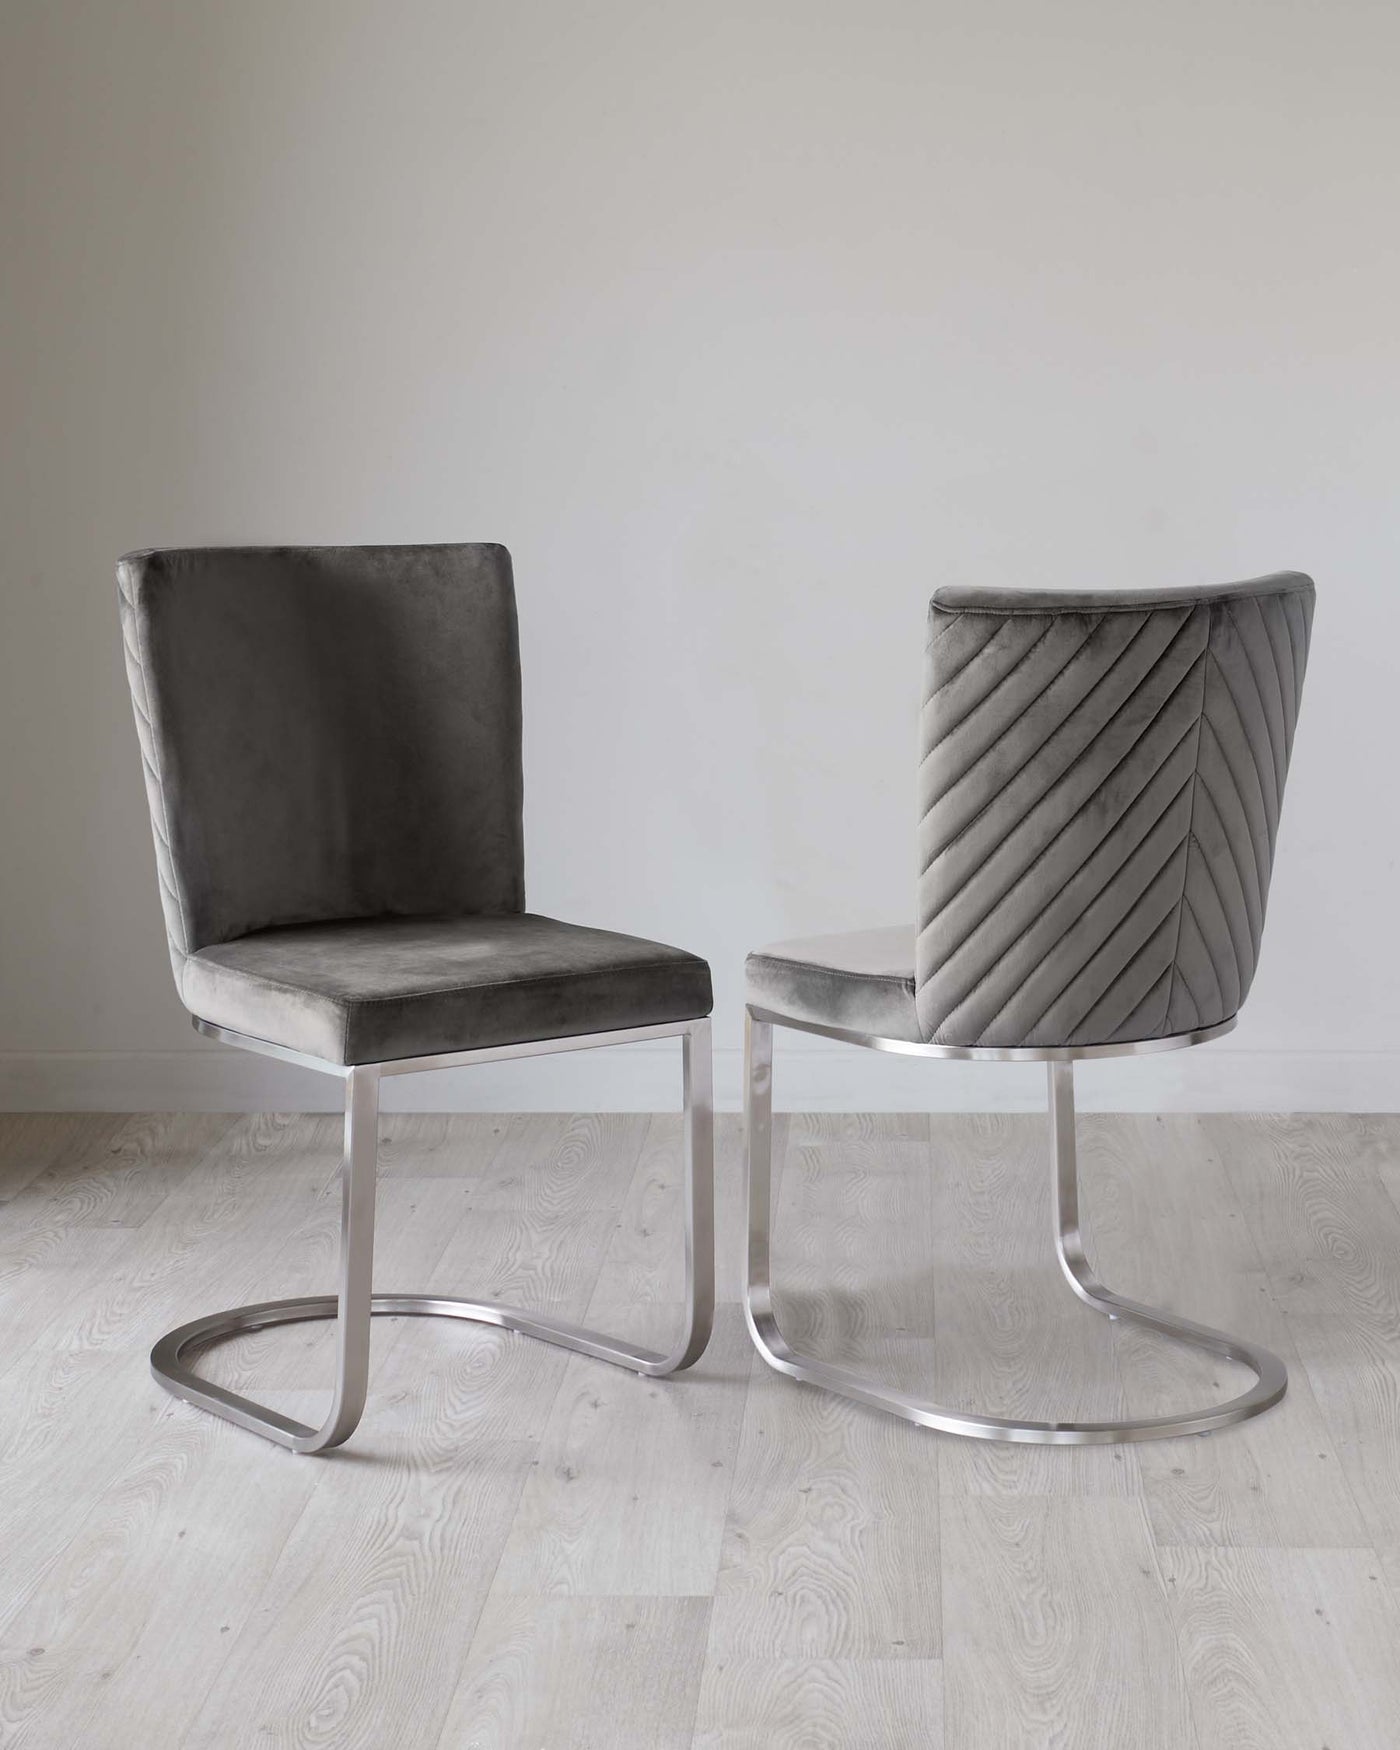 Two modern accent chairs with grey velvet upholstery and sleek silver metal cantilever bases. The chair on the right features an elegantly pleated backrest design, while the one on the left has a smooth finish. Both chairs display a minimalist style that merges comfort with contemporary aesthetics.